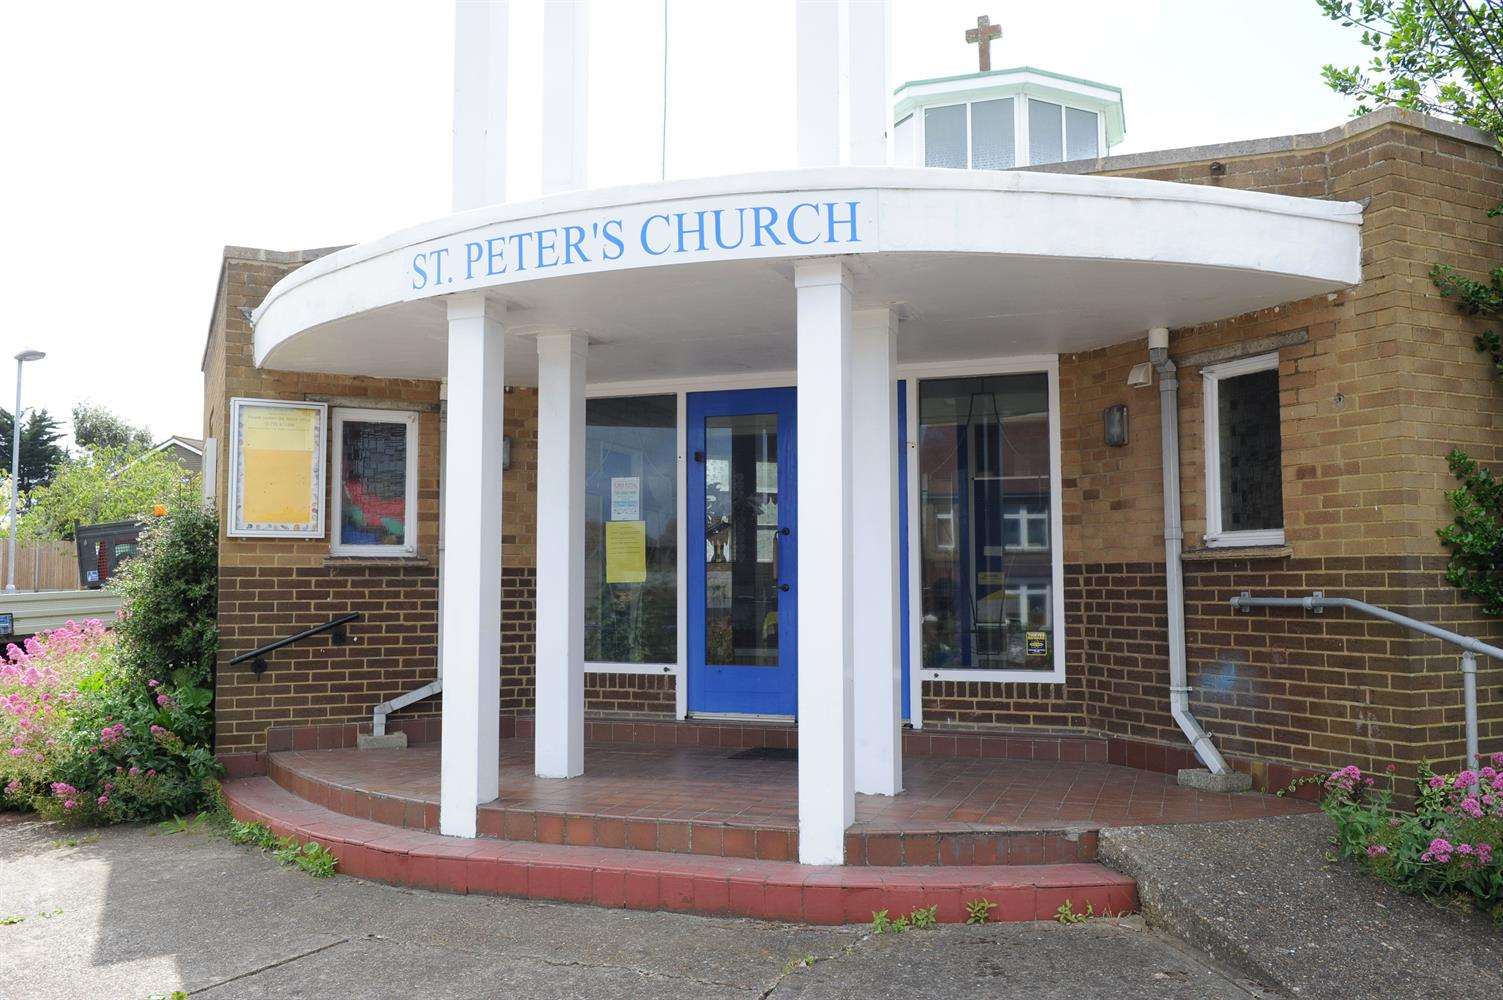 St Peter's Church, in Halfway, has been locked following reports of spiritualist activity